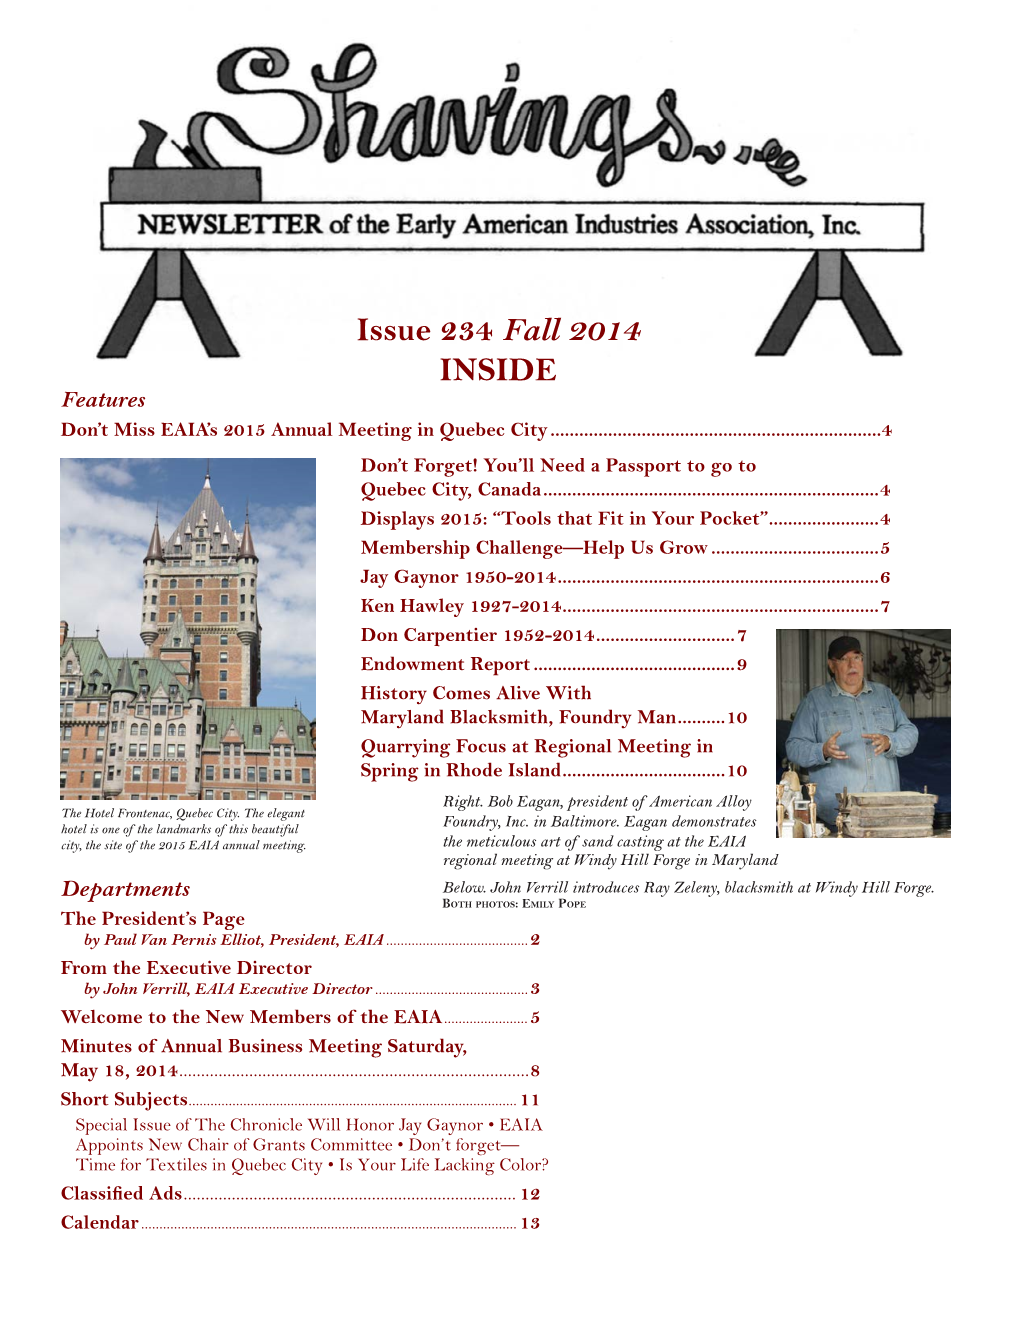 Issue 234 Fall 2014 INSIDE Features Don’T Miss EAIA’S 2015 Annual Meeting in Quebec City